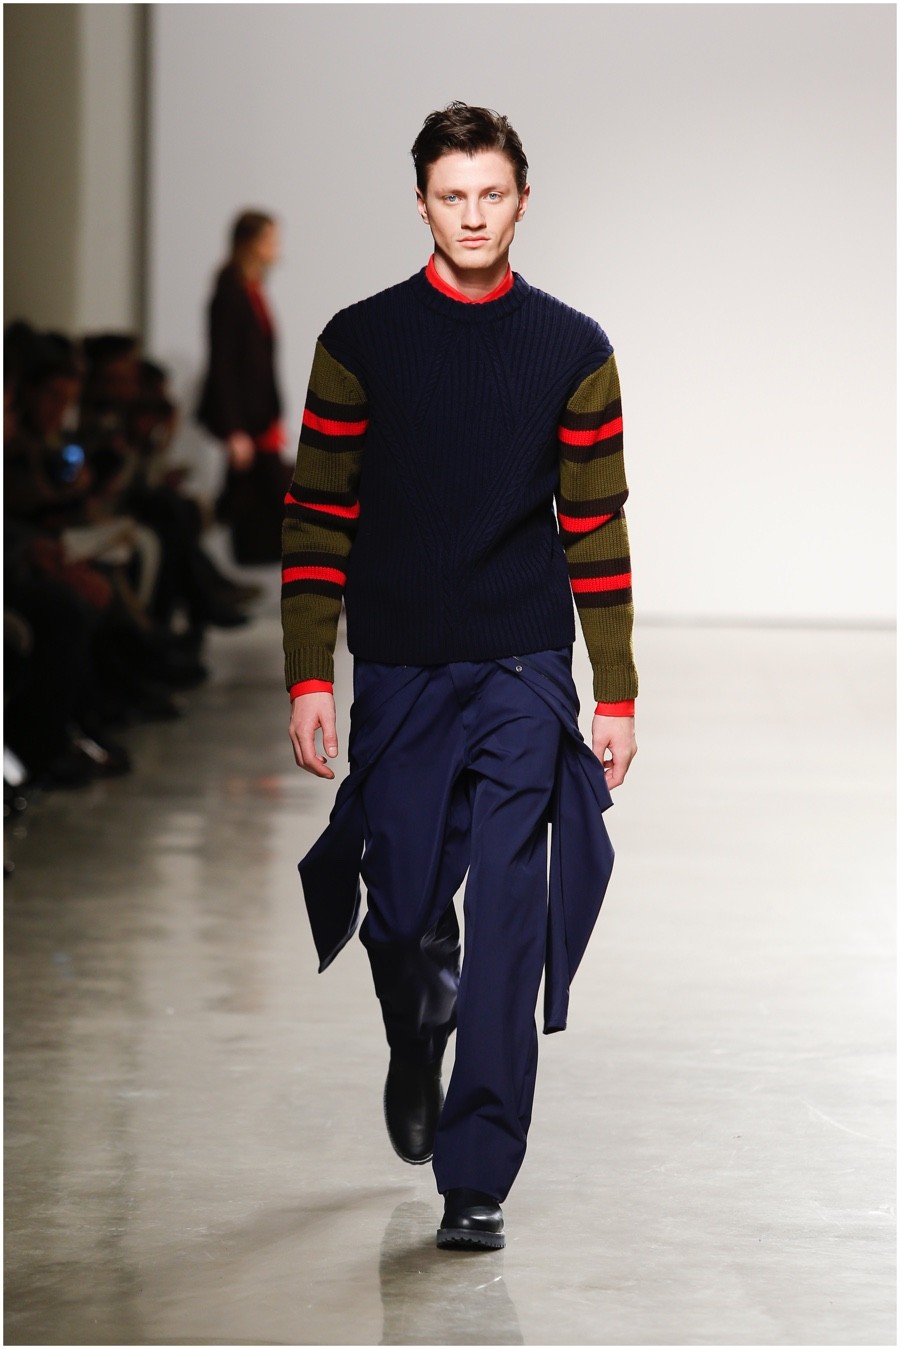 Perry Ellis Delivers 'Very Perry' Utilitarian Styles for Fall/Winter ...